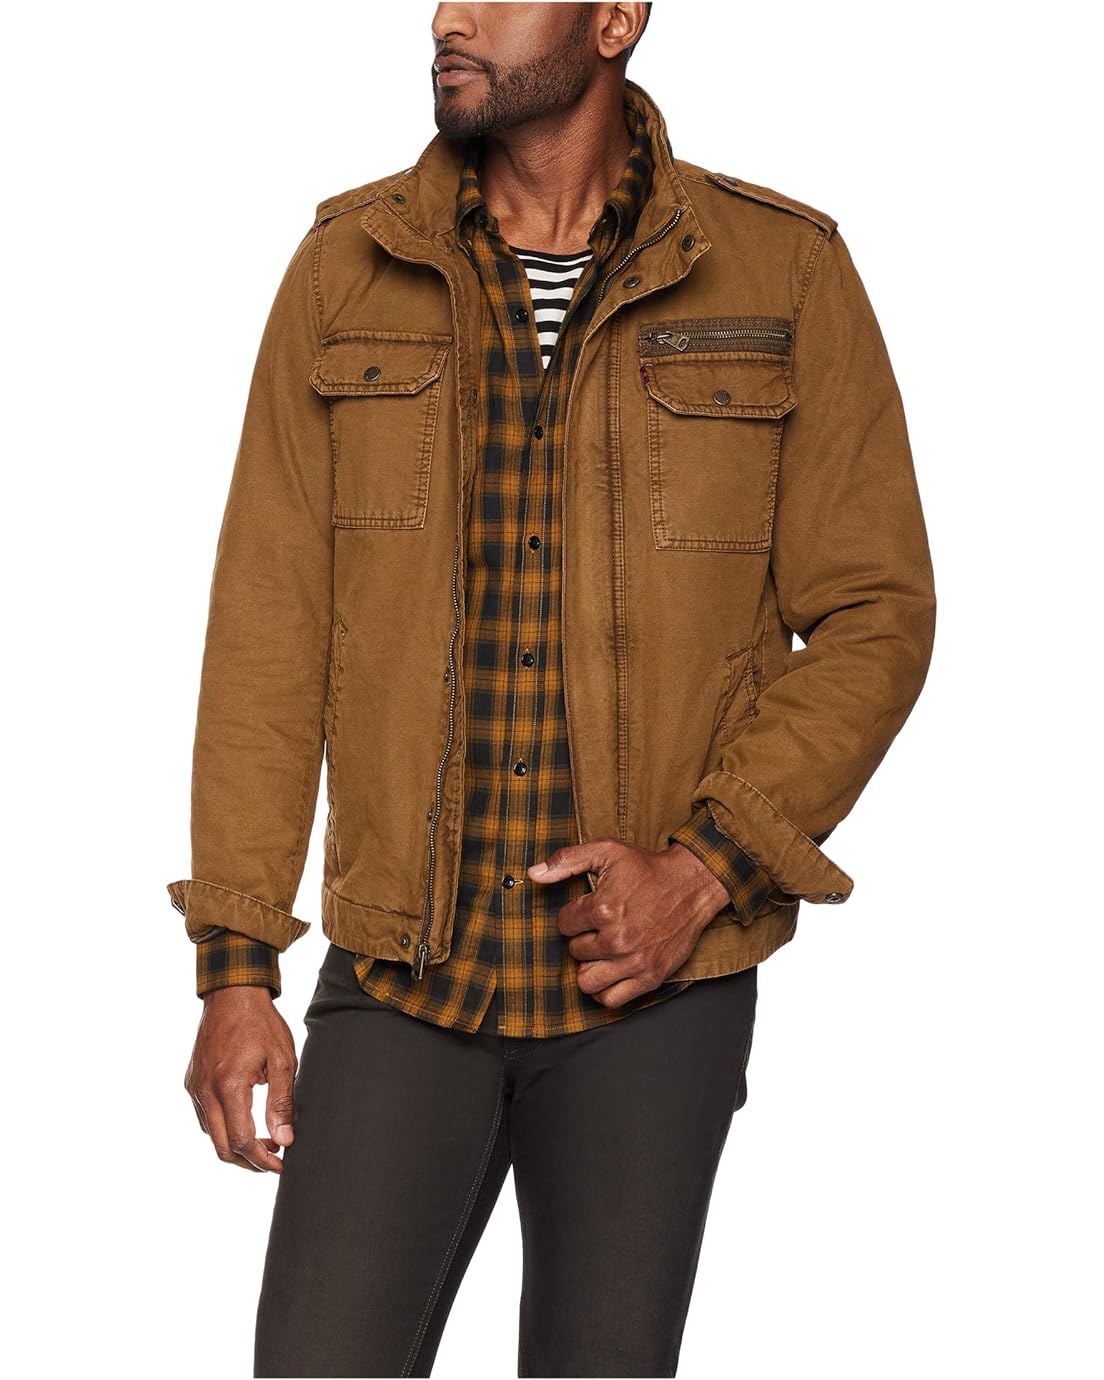 Levis Two-Pocket Military Jacket with Polytwill Lining